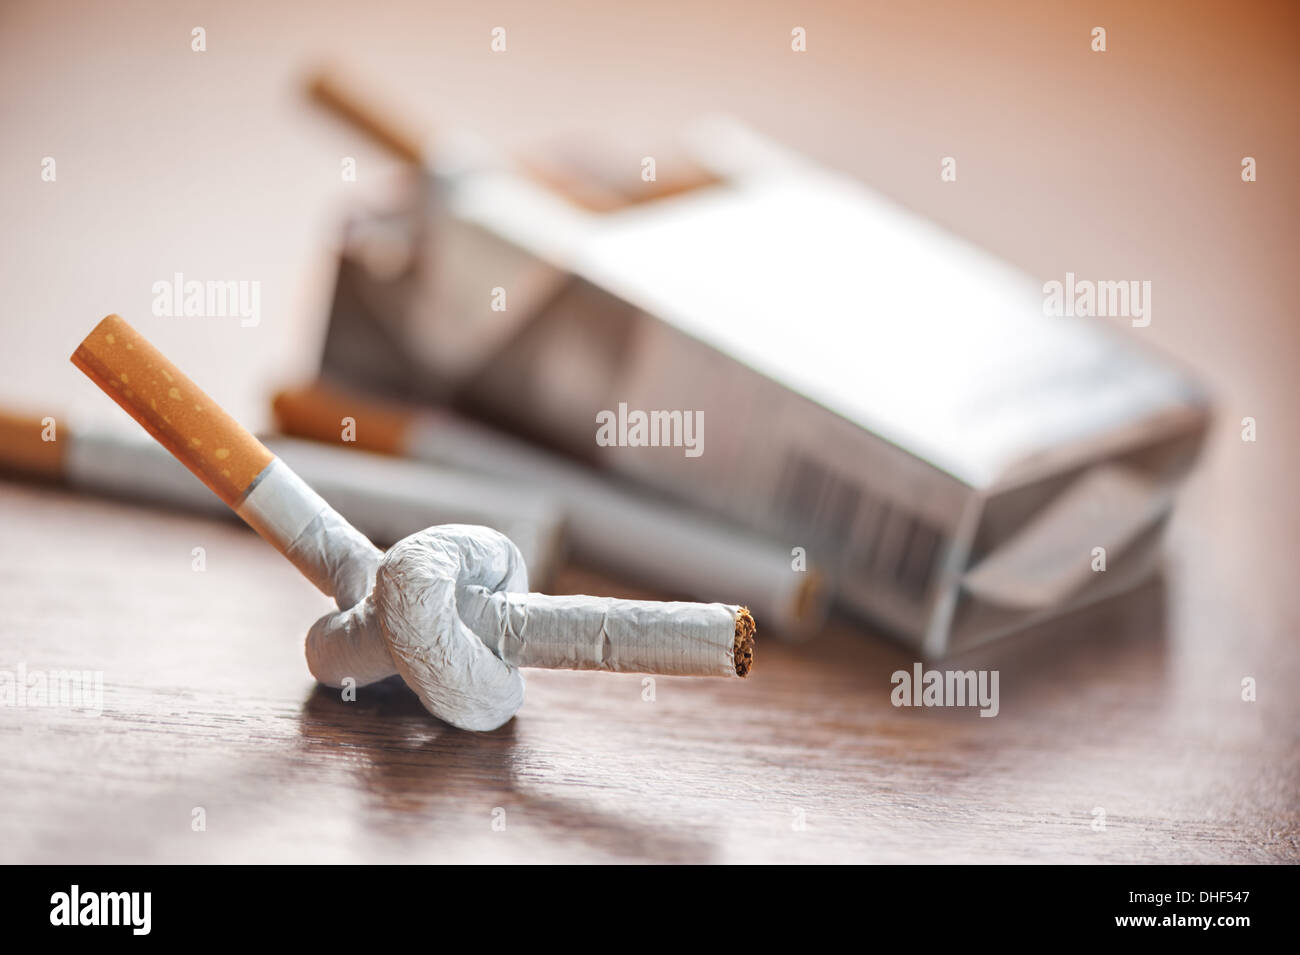 tied cigarette on table closeup Stock Photo